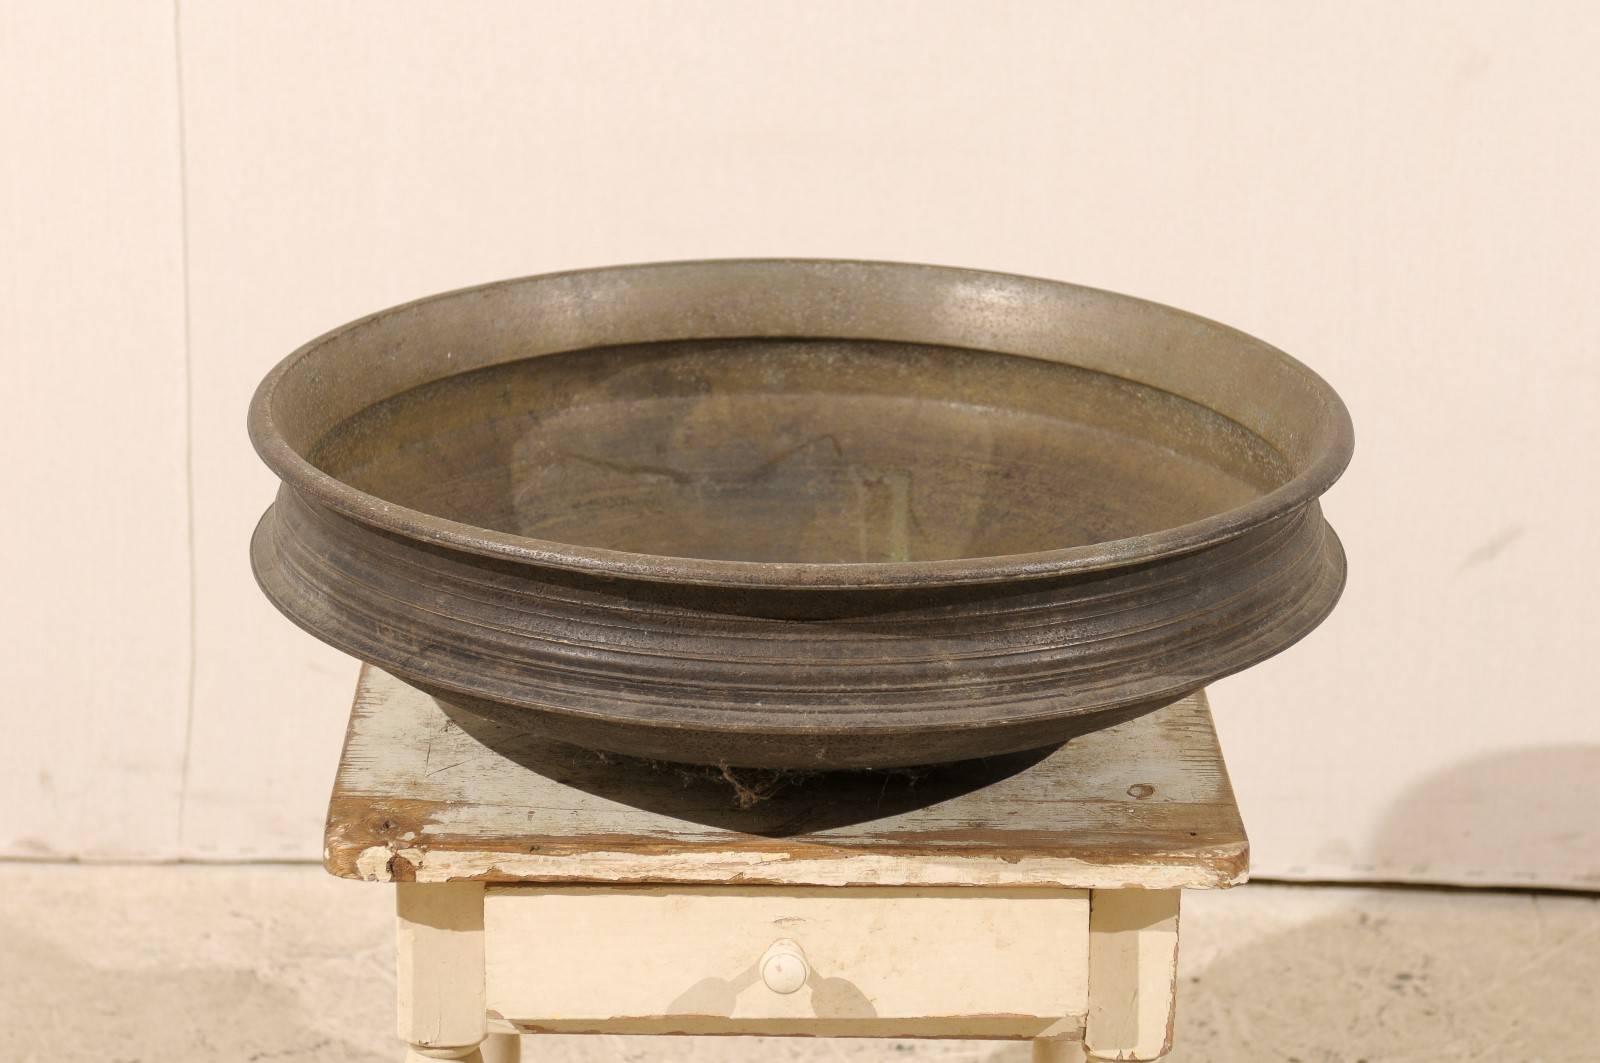 An Uruli vessel from Southern India. This Uruli, from the early 20th century, is made of bell metal. Urulis are vessels which are circular in shape and shallow in depth, and were typically traditional cookware extensively used in southern India.